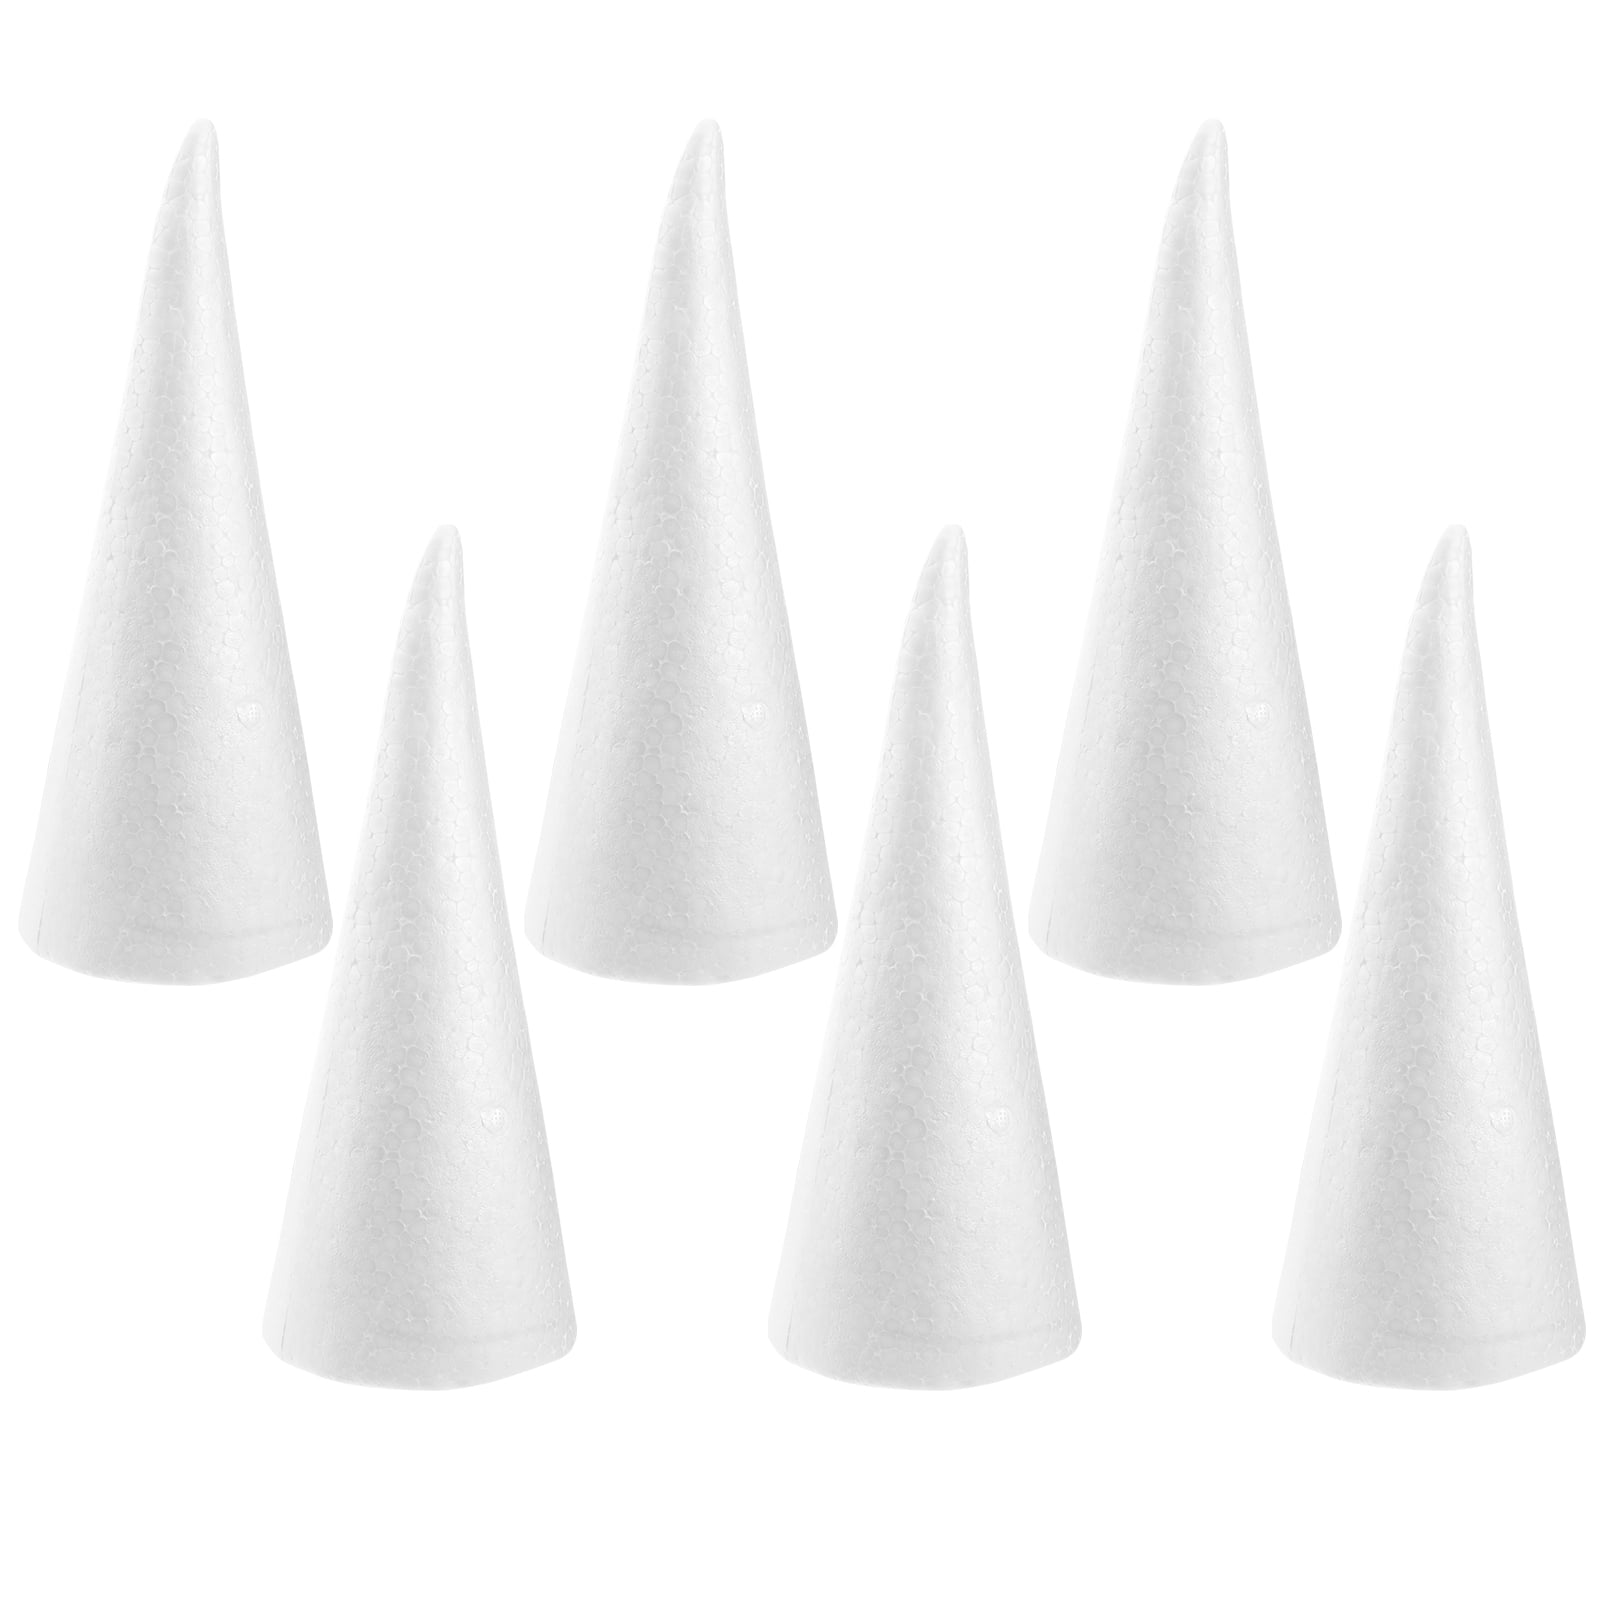 Zcyi 6pcs Craft Cone Shaped for DIY Craft Christmas Tree Table ...